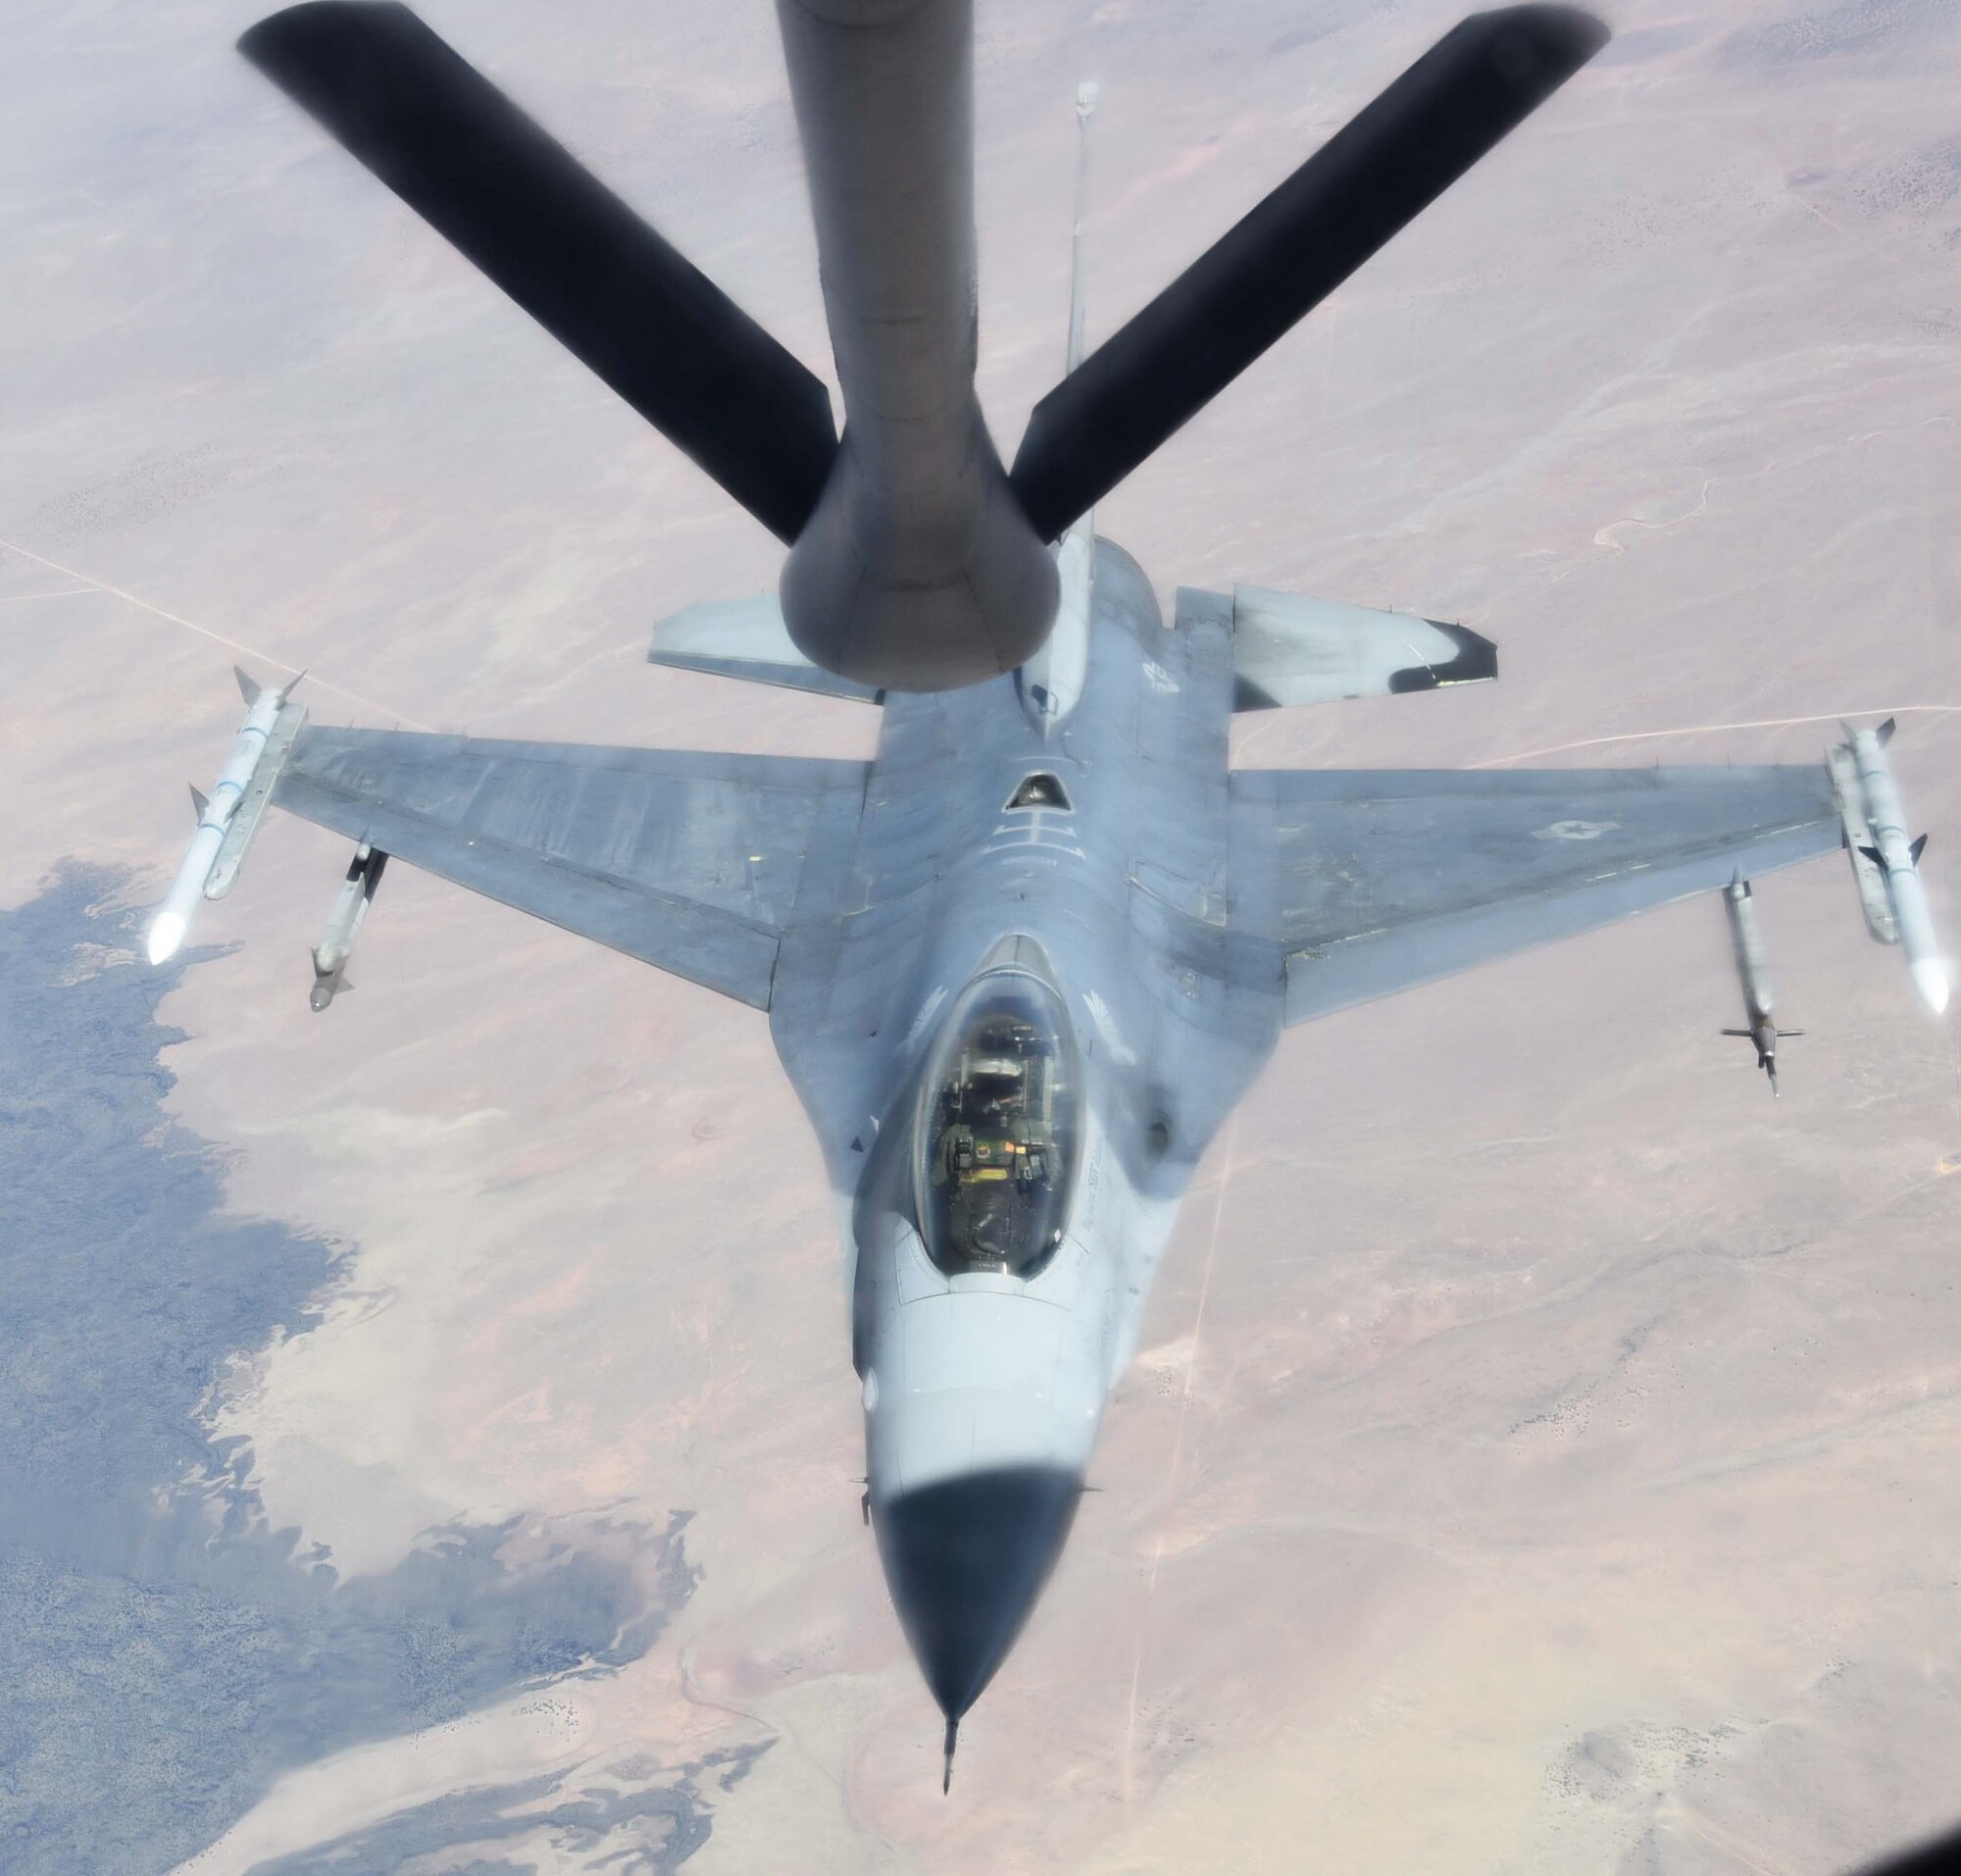 An F-16 Fighting Falcon from the 54th Fighter Squadron out of Holloman Air Force Base, N.M., approaches the boom of a KC-135 Stratotanker from McConnell AFB, Kan., April 9, 2019.  During the flight, the KC-135 crew refueled five total F-16s and made 12 contacts.